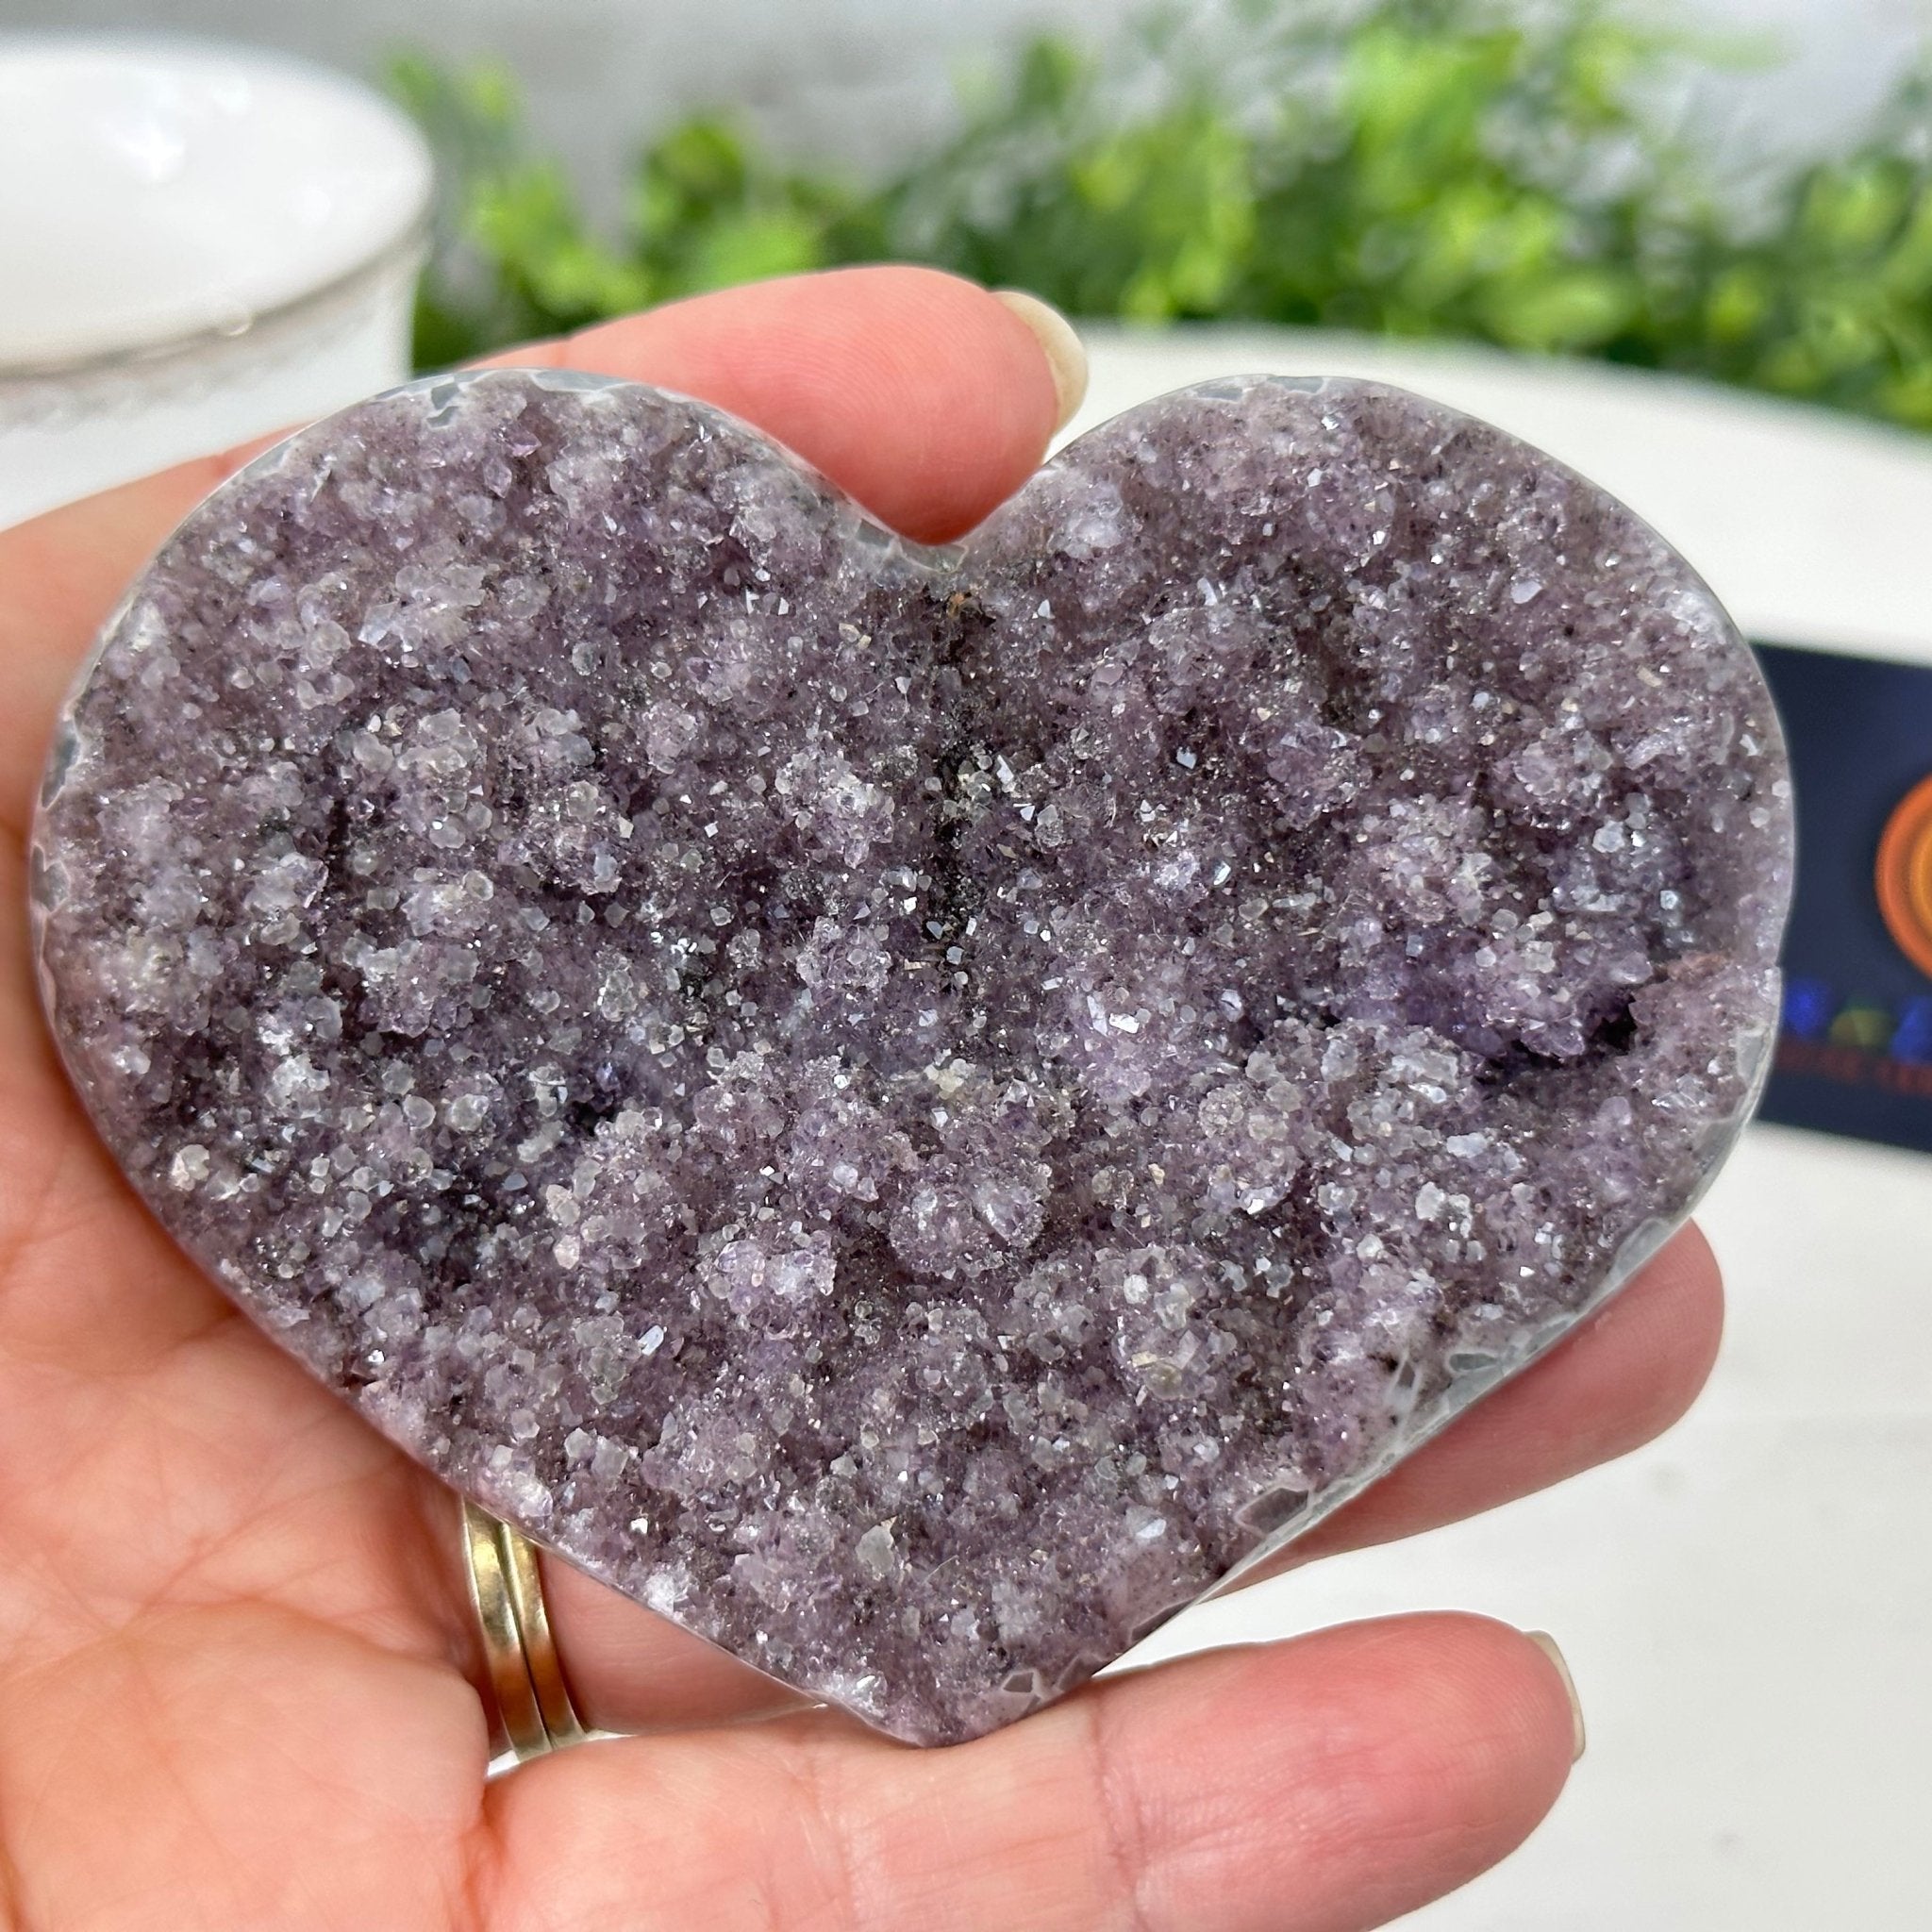 Extra Quality Amethyst Heart Geode on an Acrylic Stand, 0.31 lbs & 2.2" Tall #5462-0026 by Brazil Gems - Brazil GemsBrazil GemsExtra Quality Amethyst Heart Geode on an Acrylic Stand, 0.31 lbs & 2.2" Tall #5462-0026 by Brazil GemsHearts5462-0026